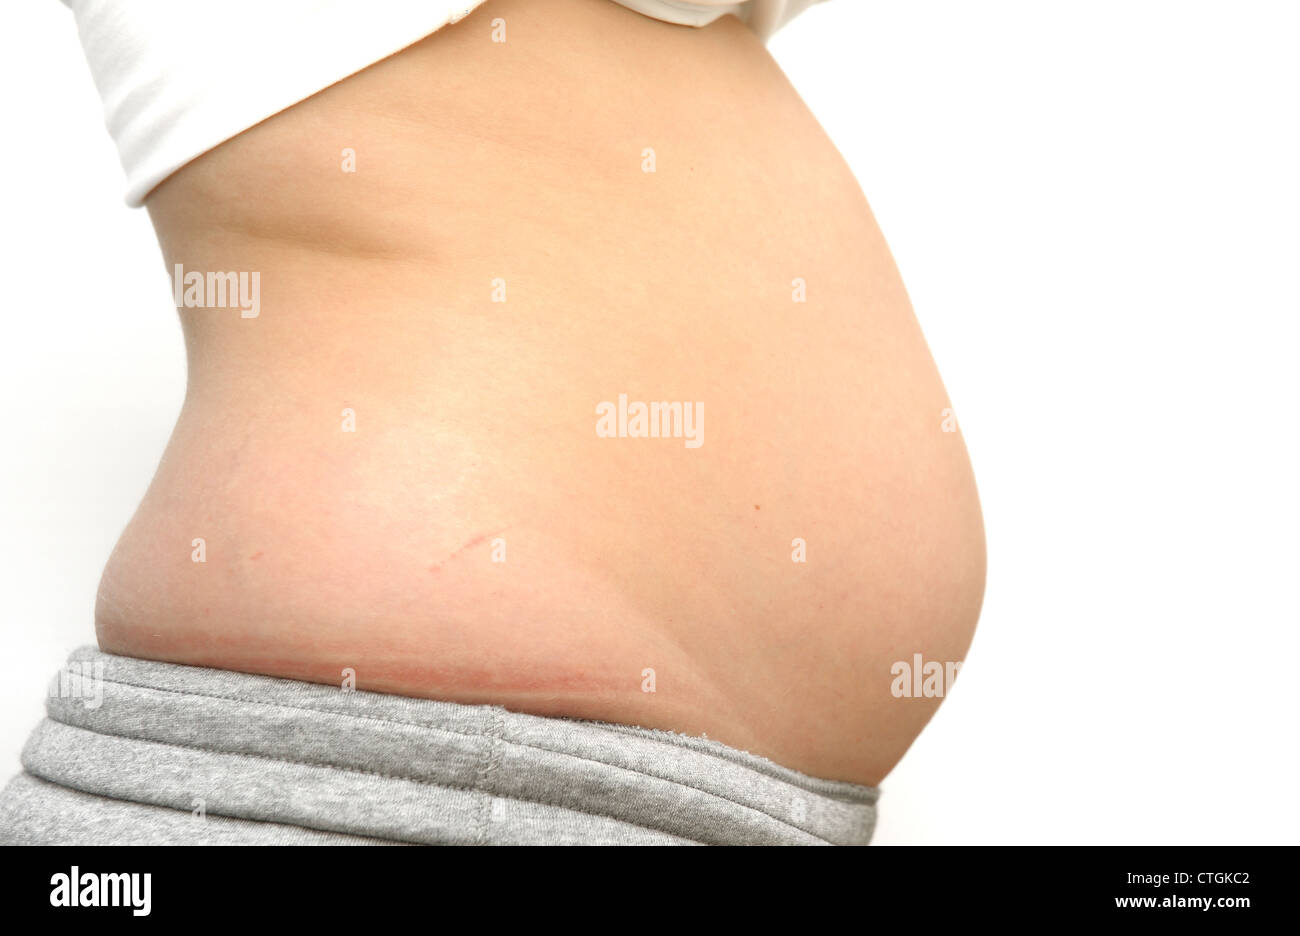 23 year old female 17 weeks pregnant Stock Photo